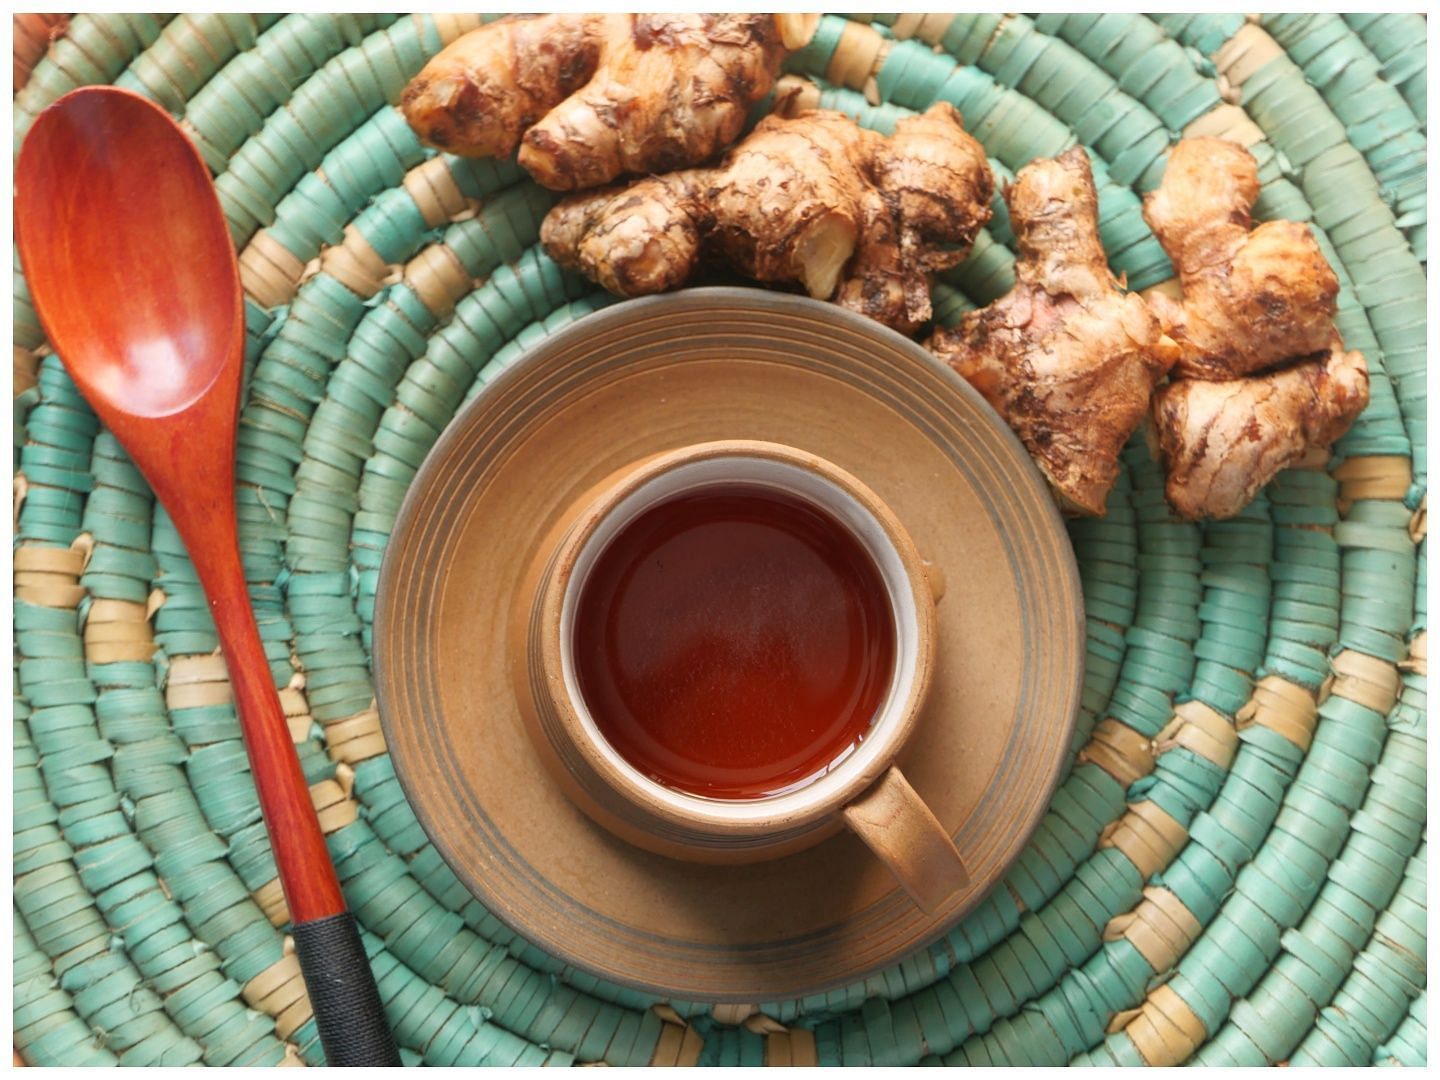 Adding ginger is better for your health (Image via Vecteezy)